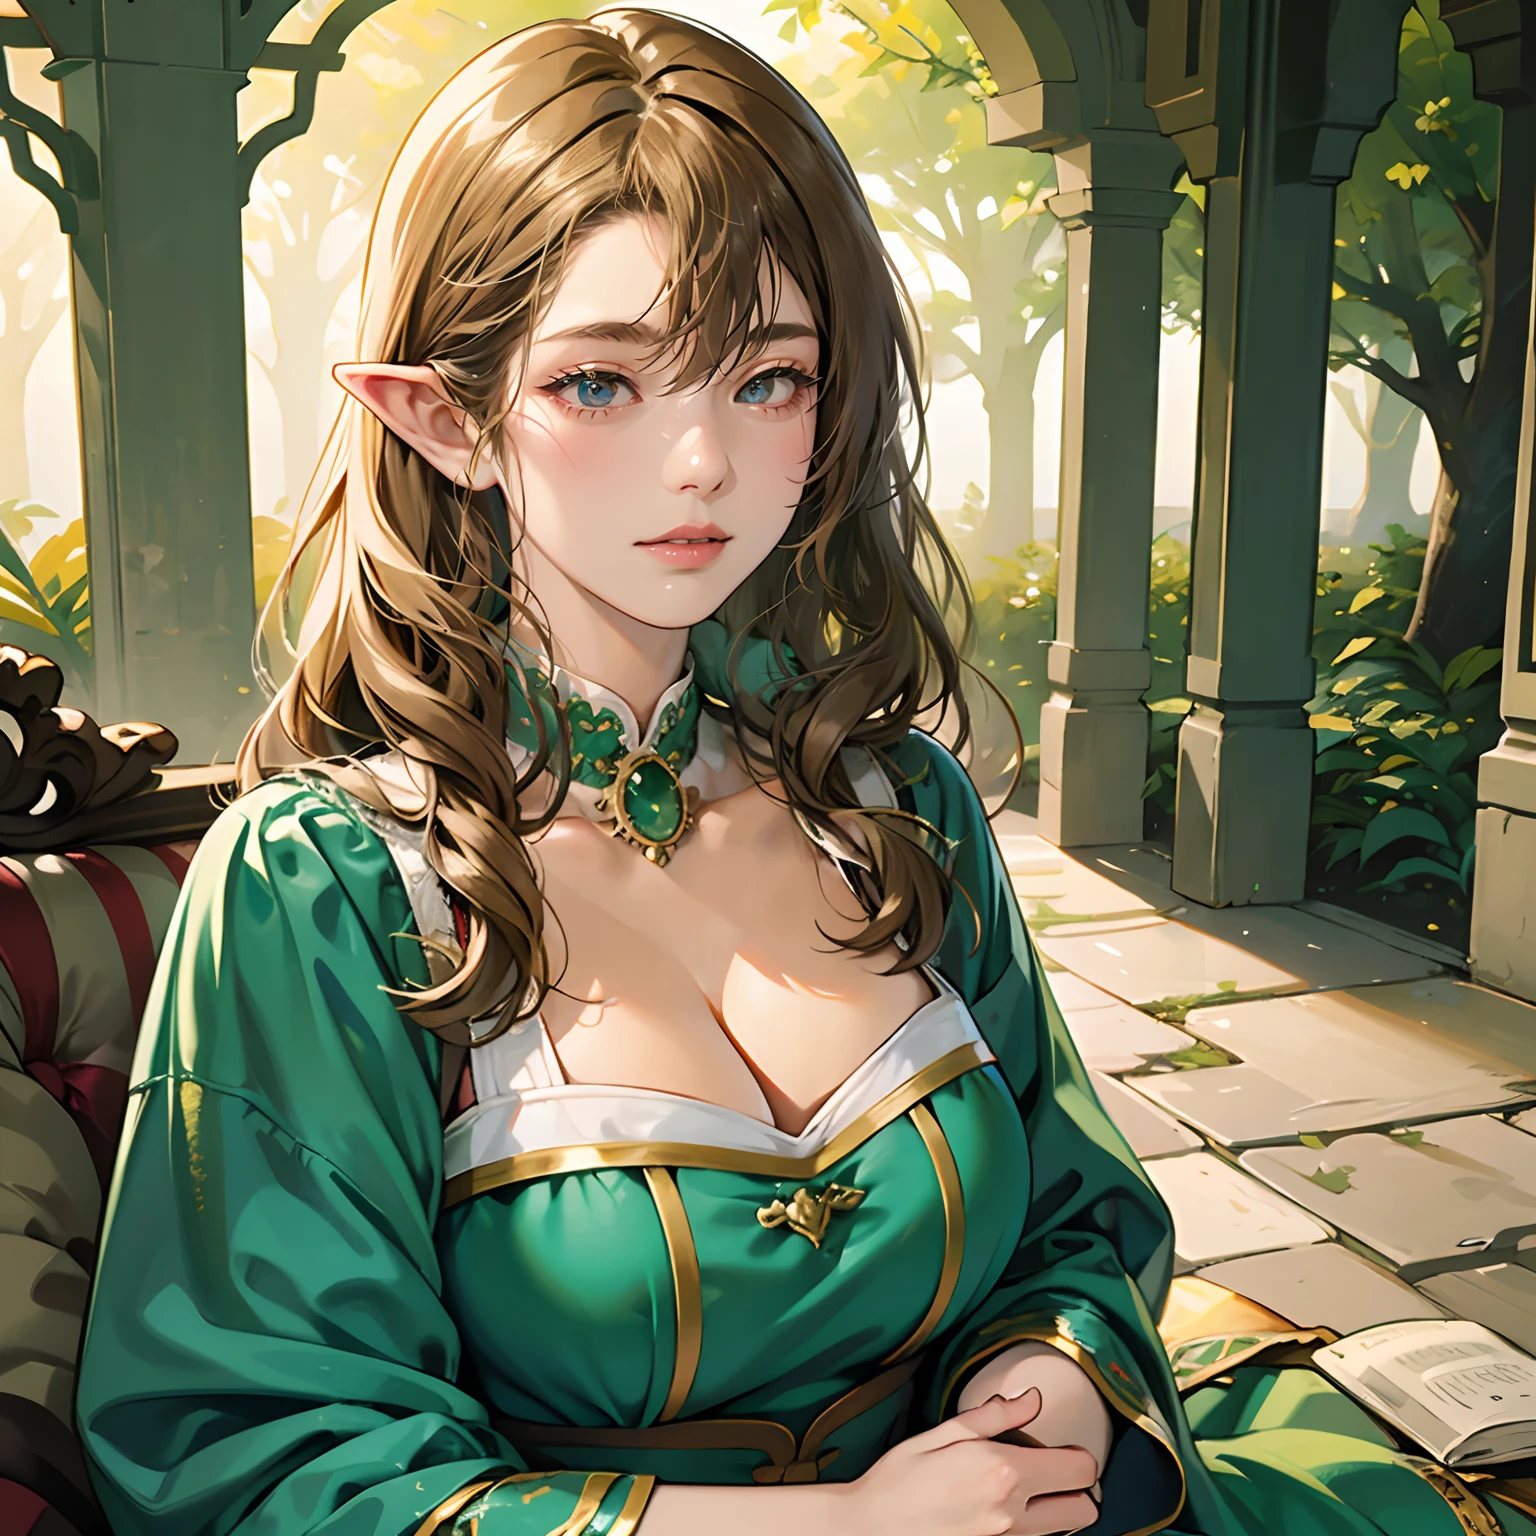 Women in Their 20s, offcial art, unity 8k wall paper, ultra-detailliert, beautifly、Aesthetic, ​masterpiece, top-quality, Photorealsitic, Female Elf、Dark green eyes、blondehair、Braids:2.0、Pointed ears、Dark green costume、Light green blouse、Gold Brooch、golden hair ornaments、Big magic wand:2.0、Big bag、depth of fields, Fantastic atmosphere, Calm palette, tranquil mood, Soft shading、Ruins in the forest、Ruins covered in vegetation、Crumbling stone statue、Green Tree々、Beautiful Landscapes、bbw、very large breast、plump figure、Shining Fairy